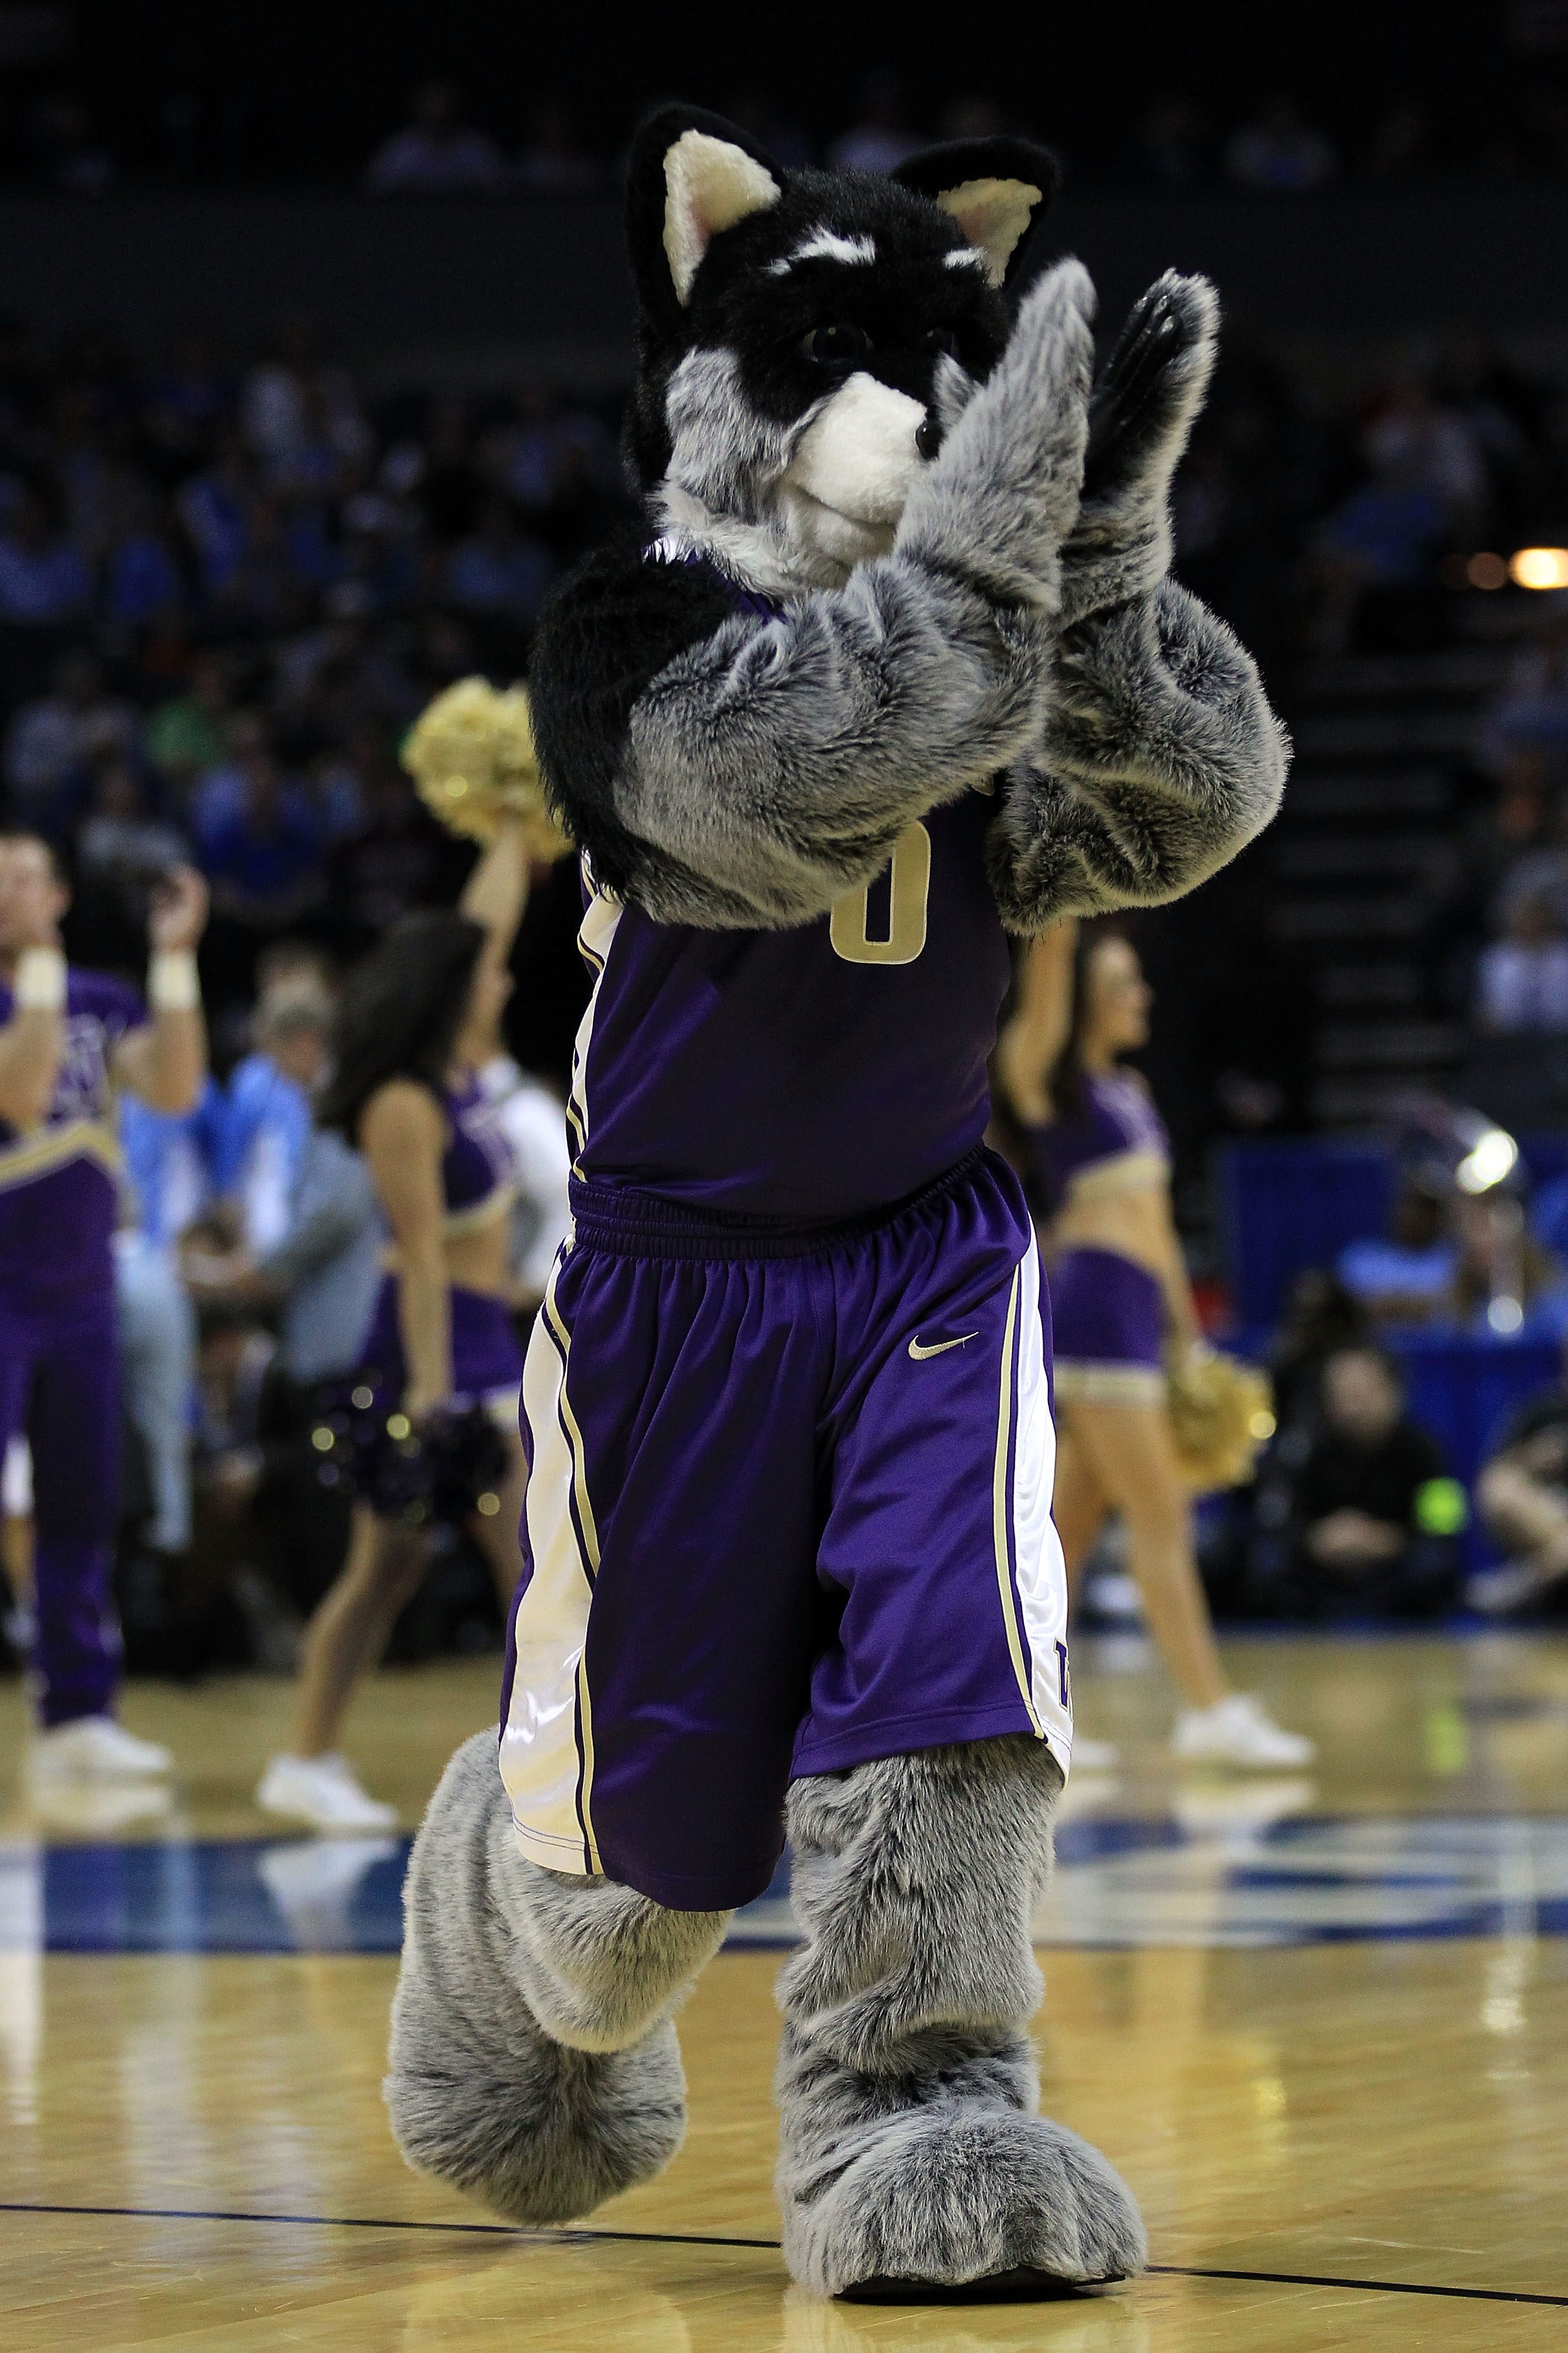 CHARLOTTE, NC - MARCH 20:  The Washington Huskies performs on the court during the third round of the 2011 NCAA men's basketball tournament at Time Warner Cable Arena on March 20, 2011 in Charlotte, North Carolina.  (Photo by Streeter Lecka/Getty Images)